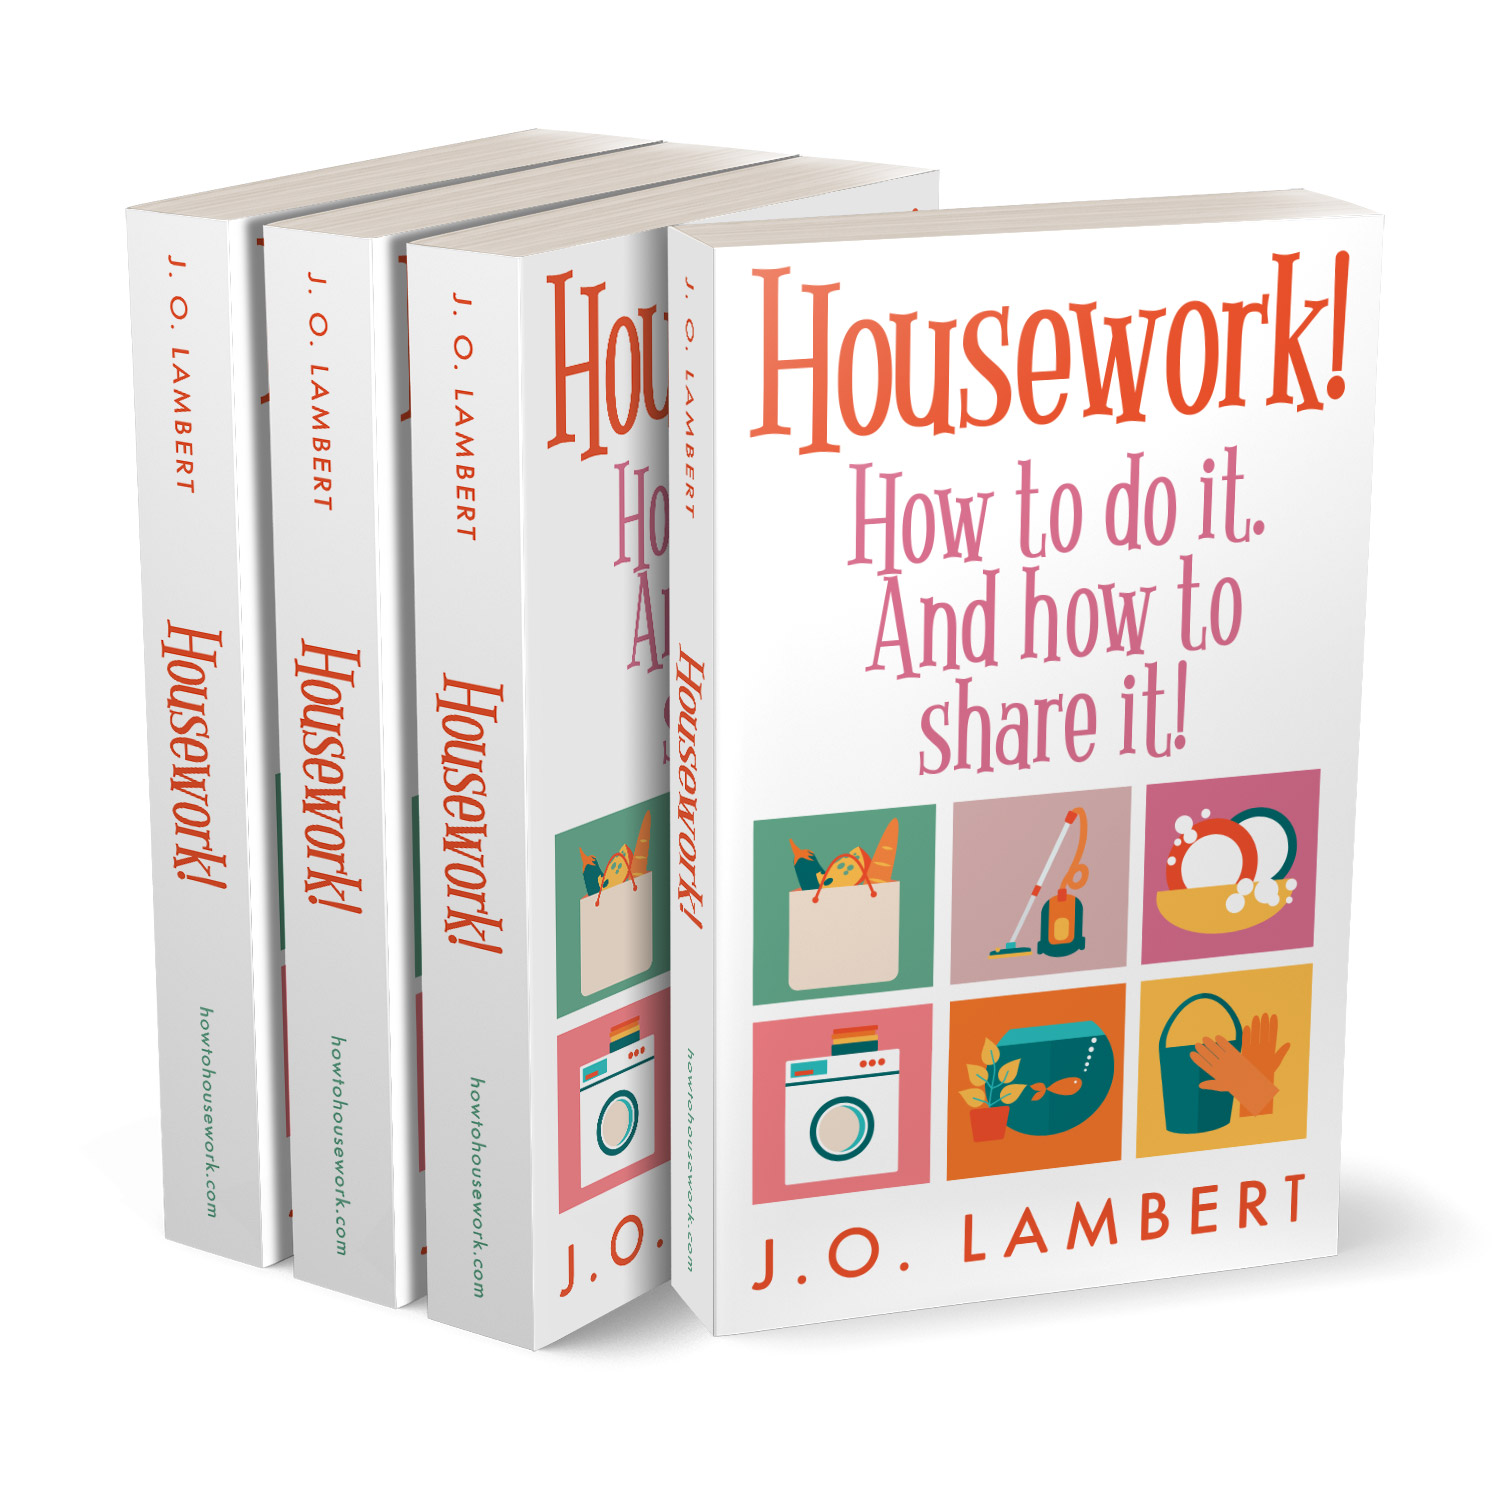 'Housework' is a compact self-help guide to safely looking after your home. The author is J. O. Lambert. The book cover and interior design is by Mark Thomas. To learn more about what Mark could do for your book, please visit coverness.com.